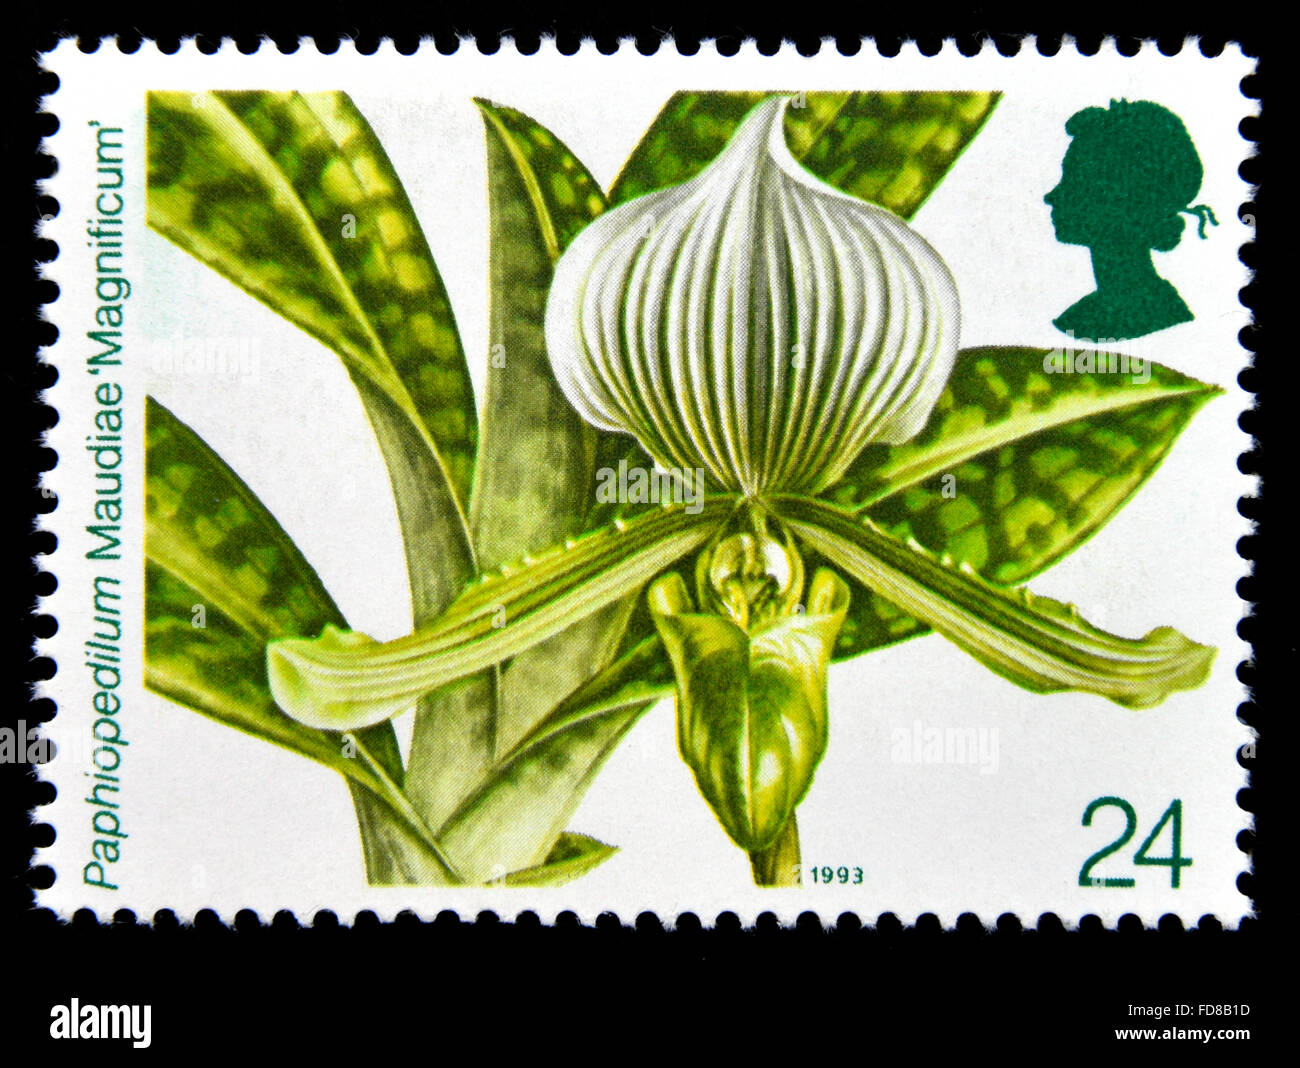 Postage stamp. Great Britain. Queen Elizabeth II. 1993. 14th. World Orchid Conference, Glasgow. 24p. Stock Photo